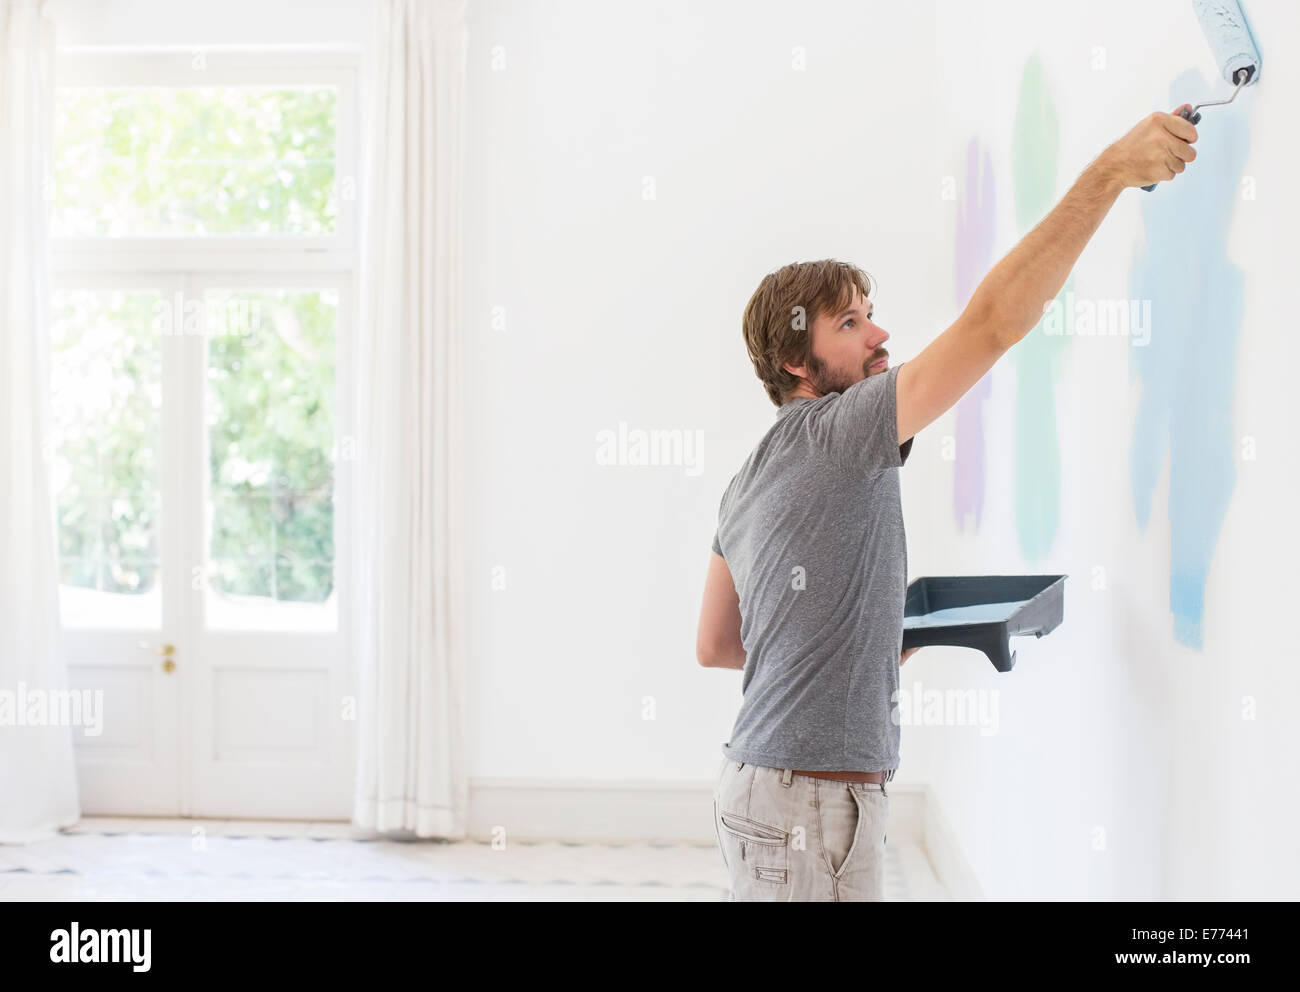 Man painting wall in living space Stock Photo